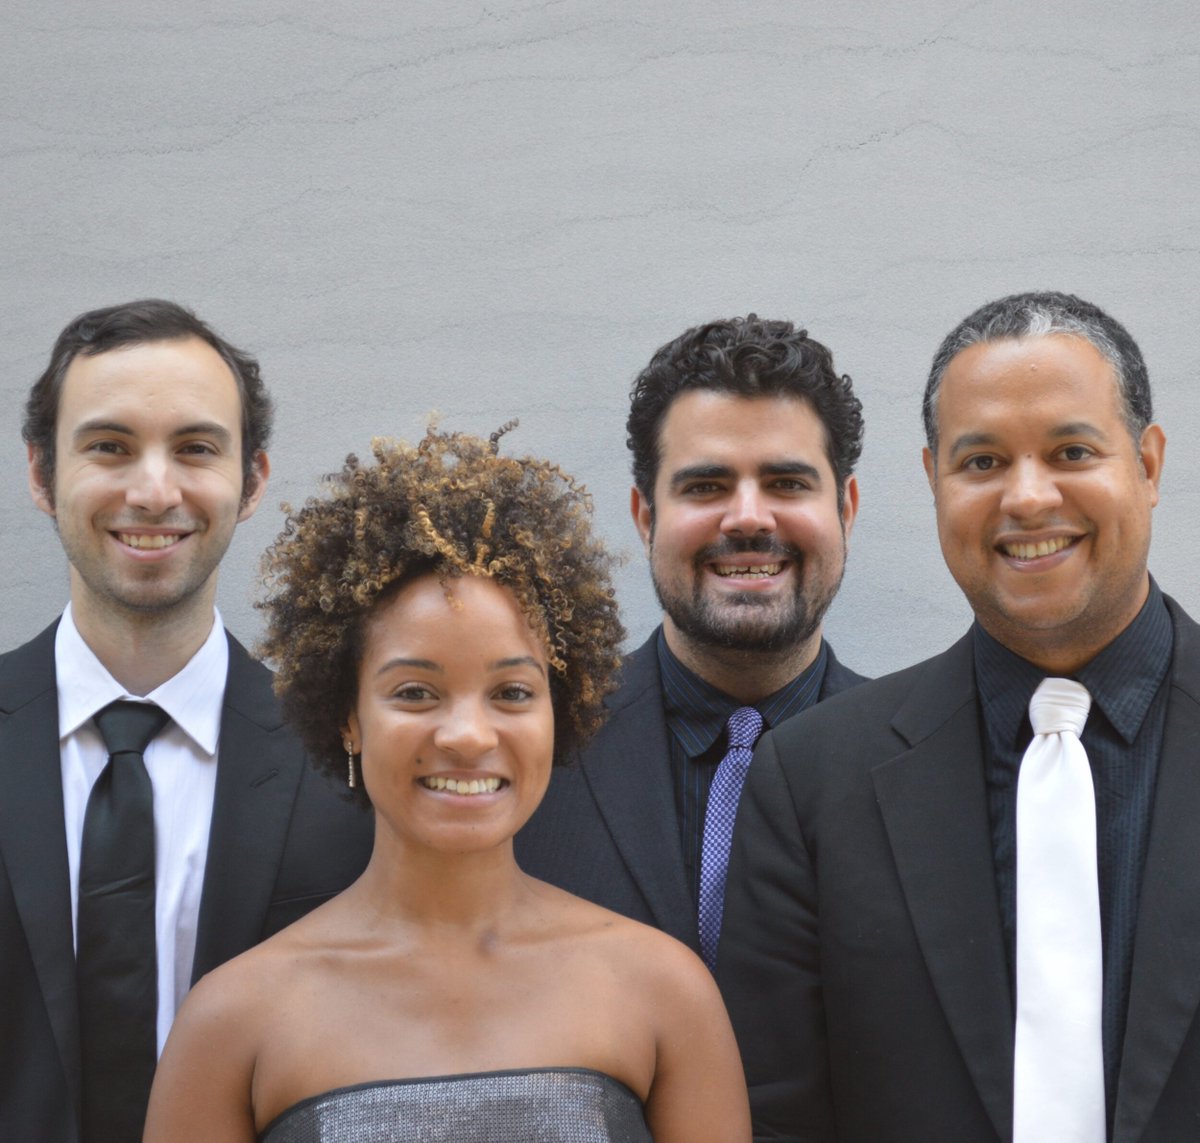 Join @AyannaWJ from 6pm as she brings us 2 hours of music introducing us to the @HarlemQuartet, as well as playing a new recording from @ChristianLiVln! 🎻 🎶